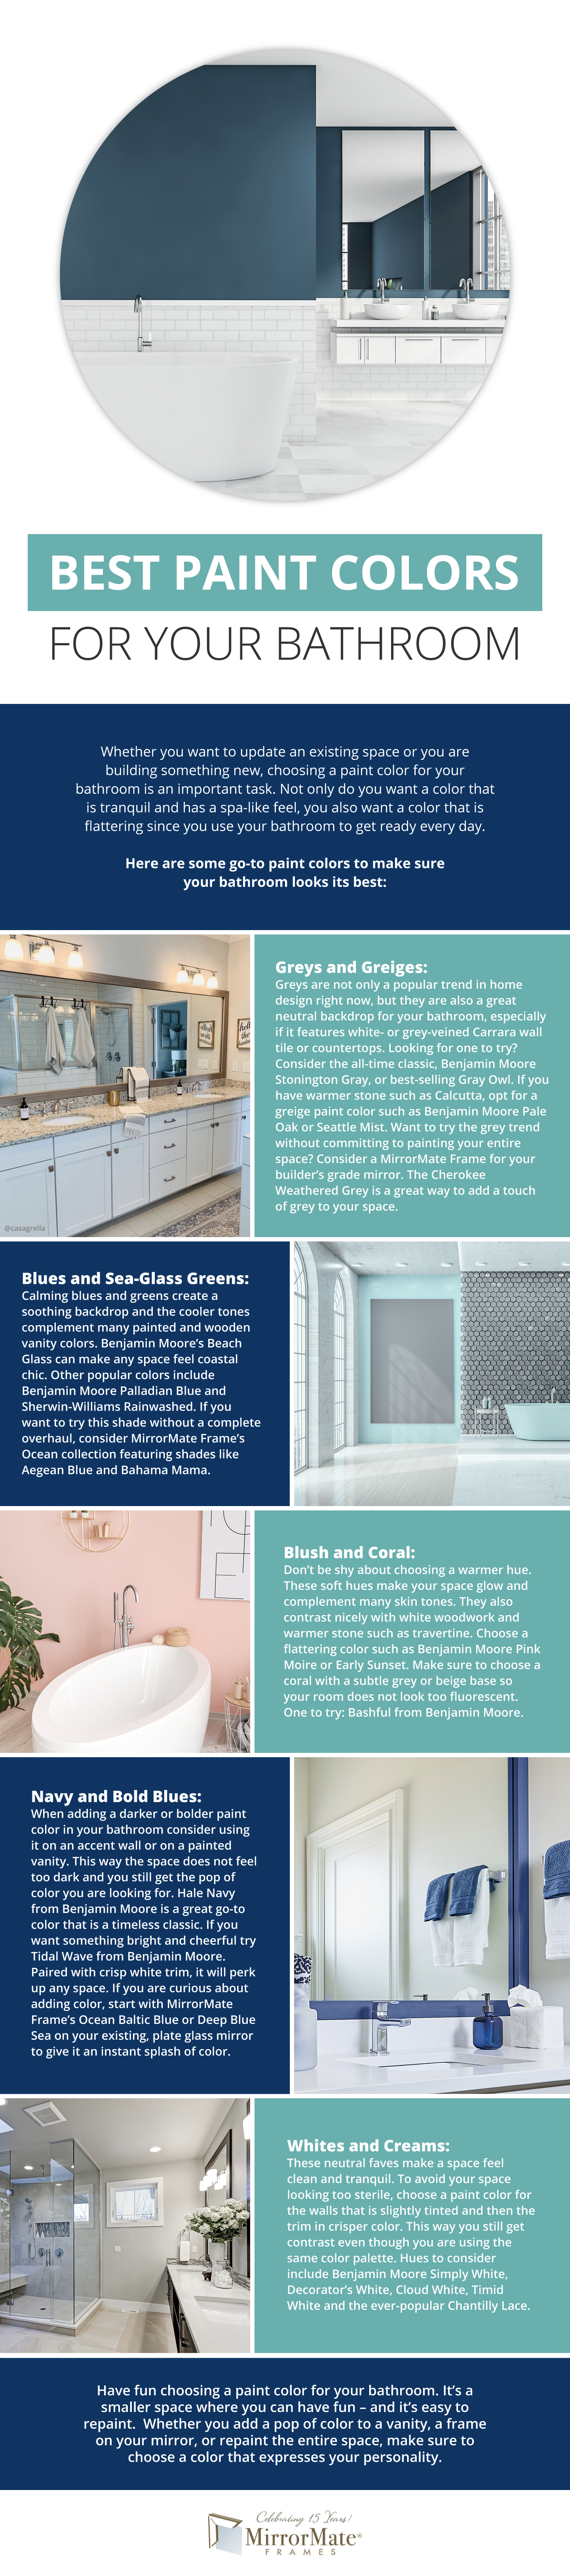 How to Choose Bathroom Paint Colors 